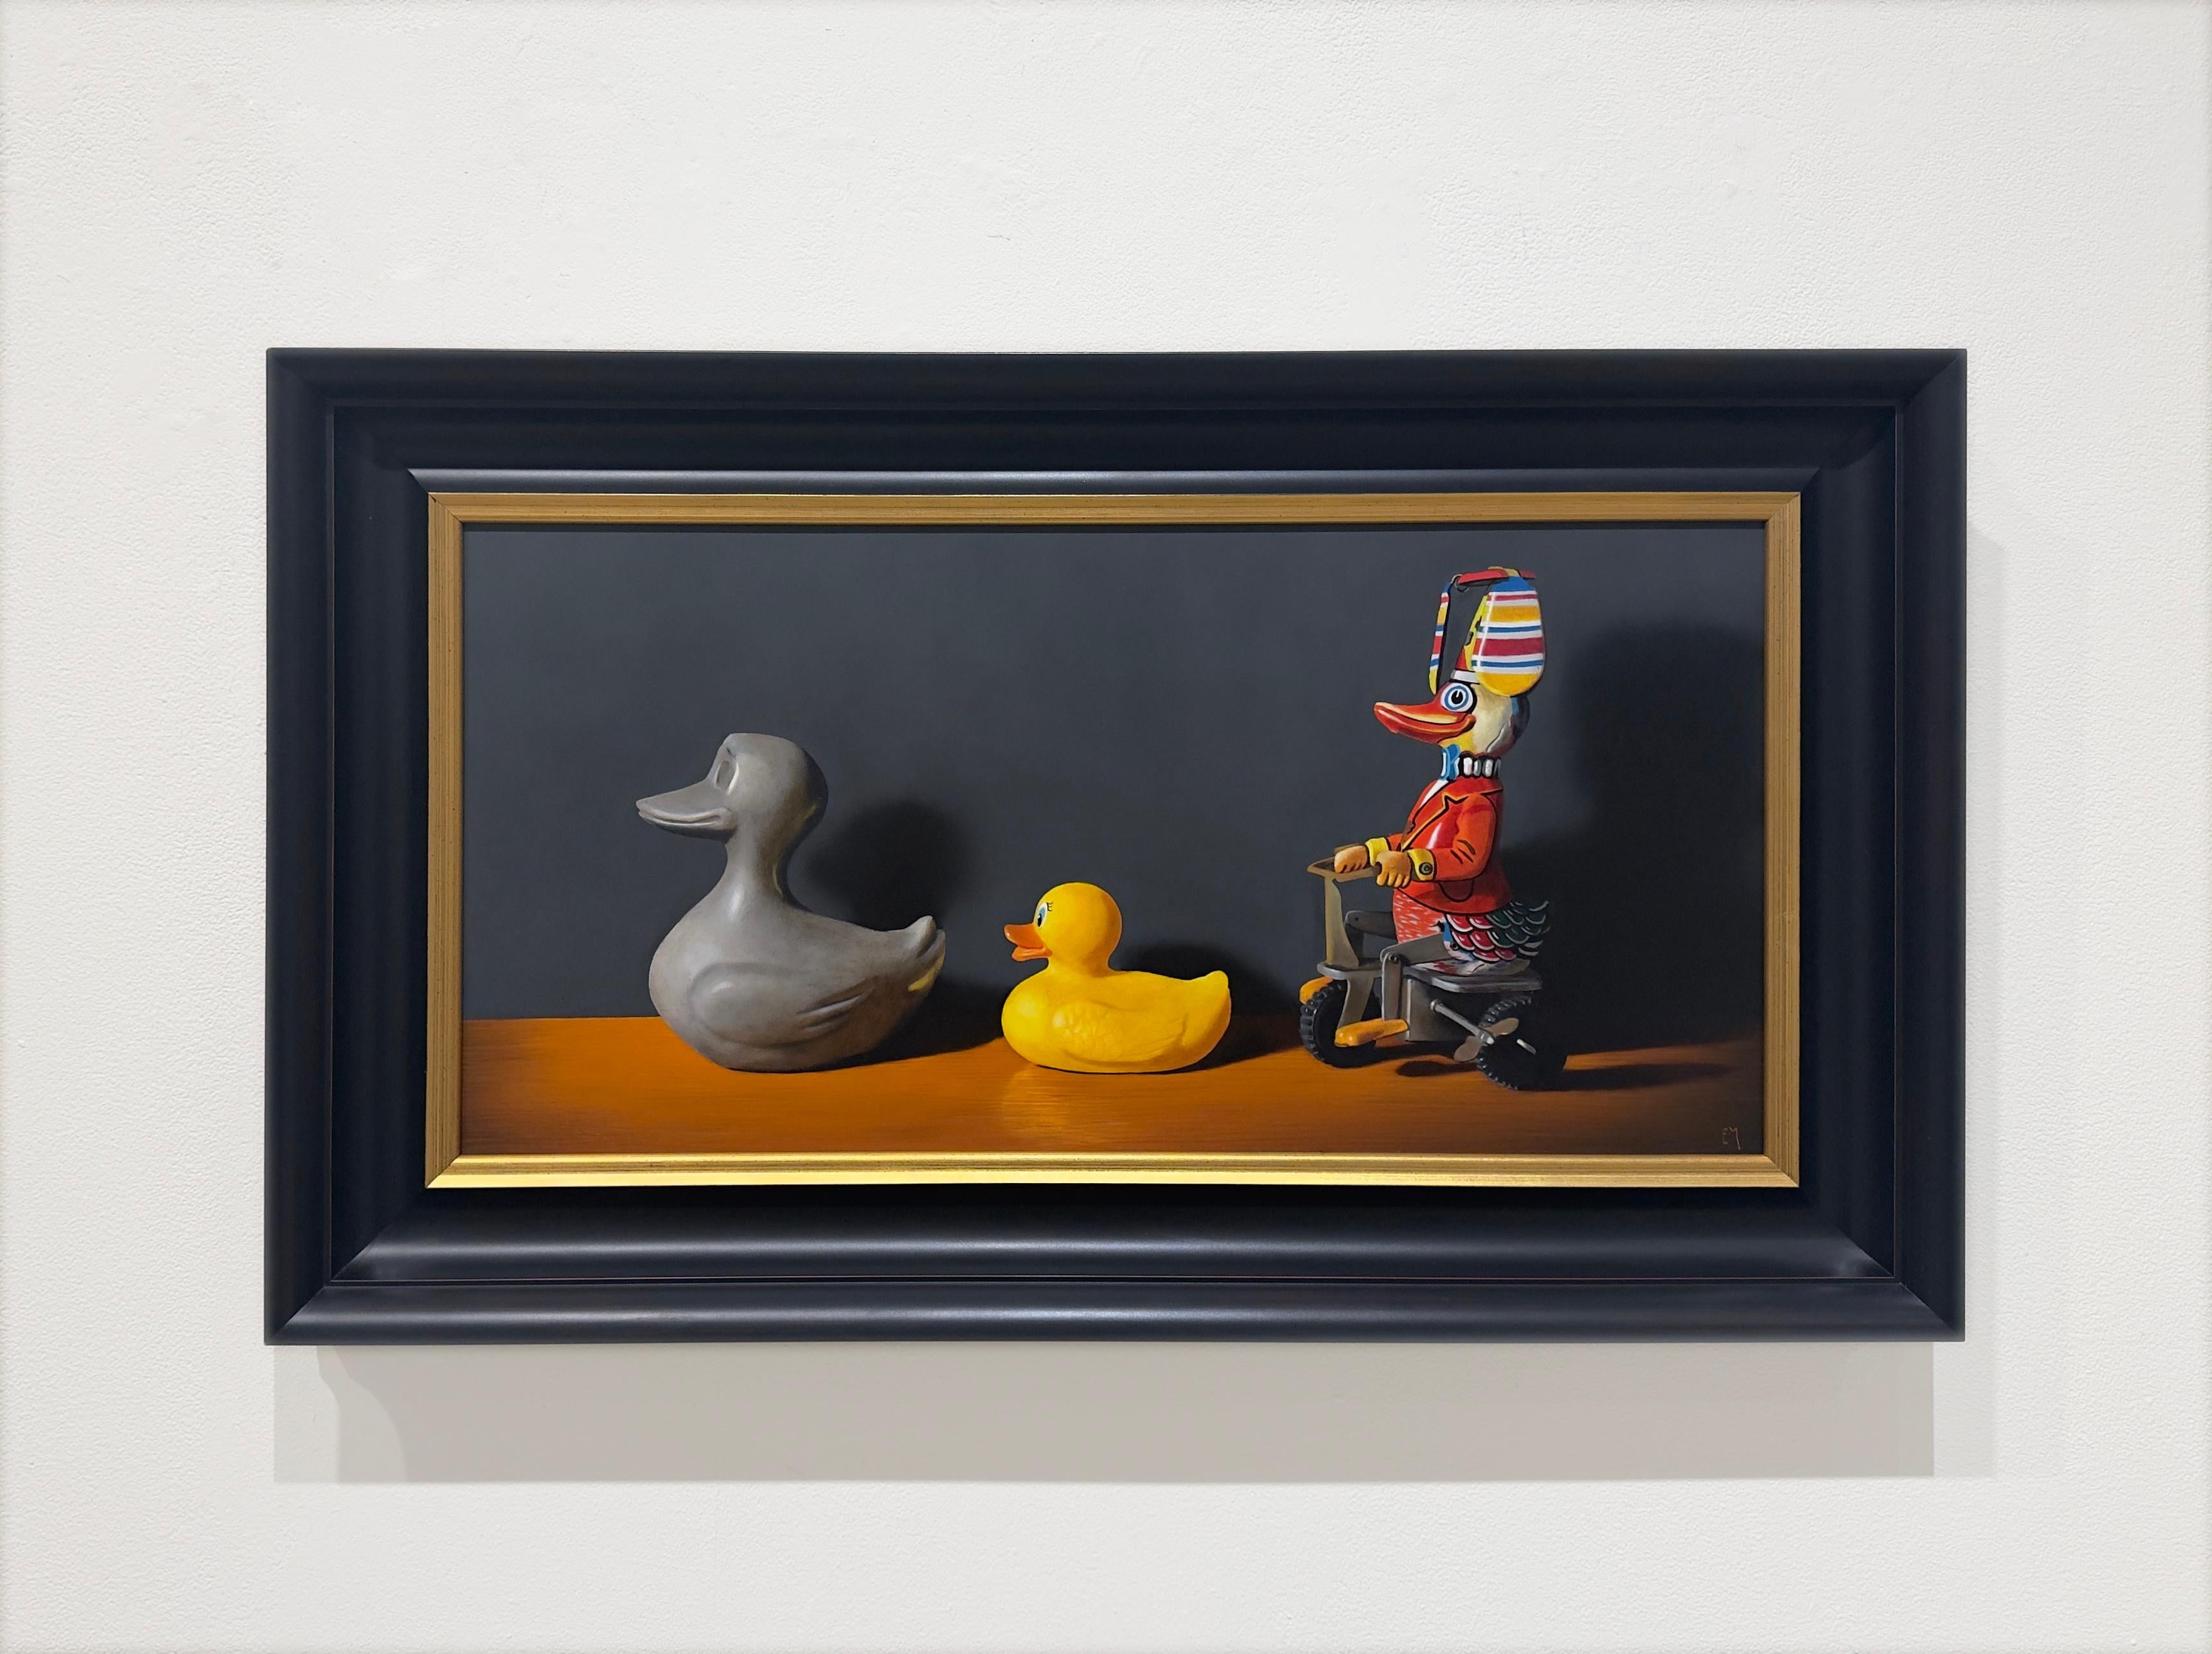 KEEP YOUR DUCKS IN A ROW - Contemporary / Humor / Still Life - Painting by Elizabeth McGhee